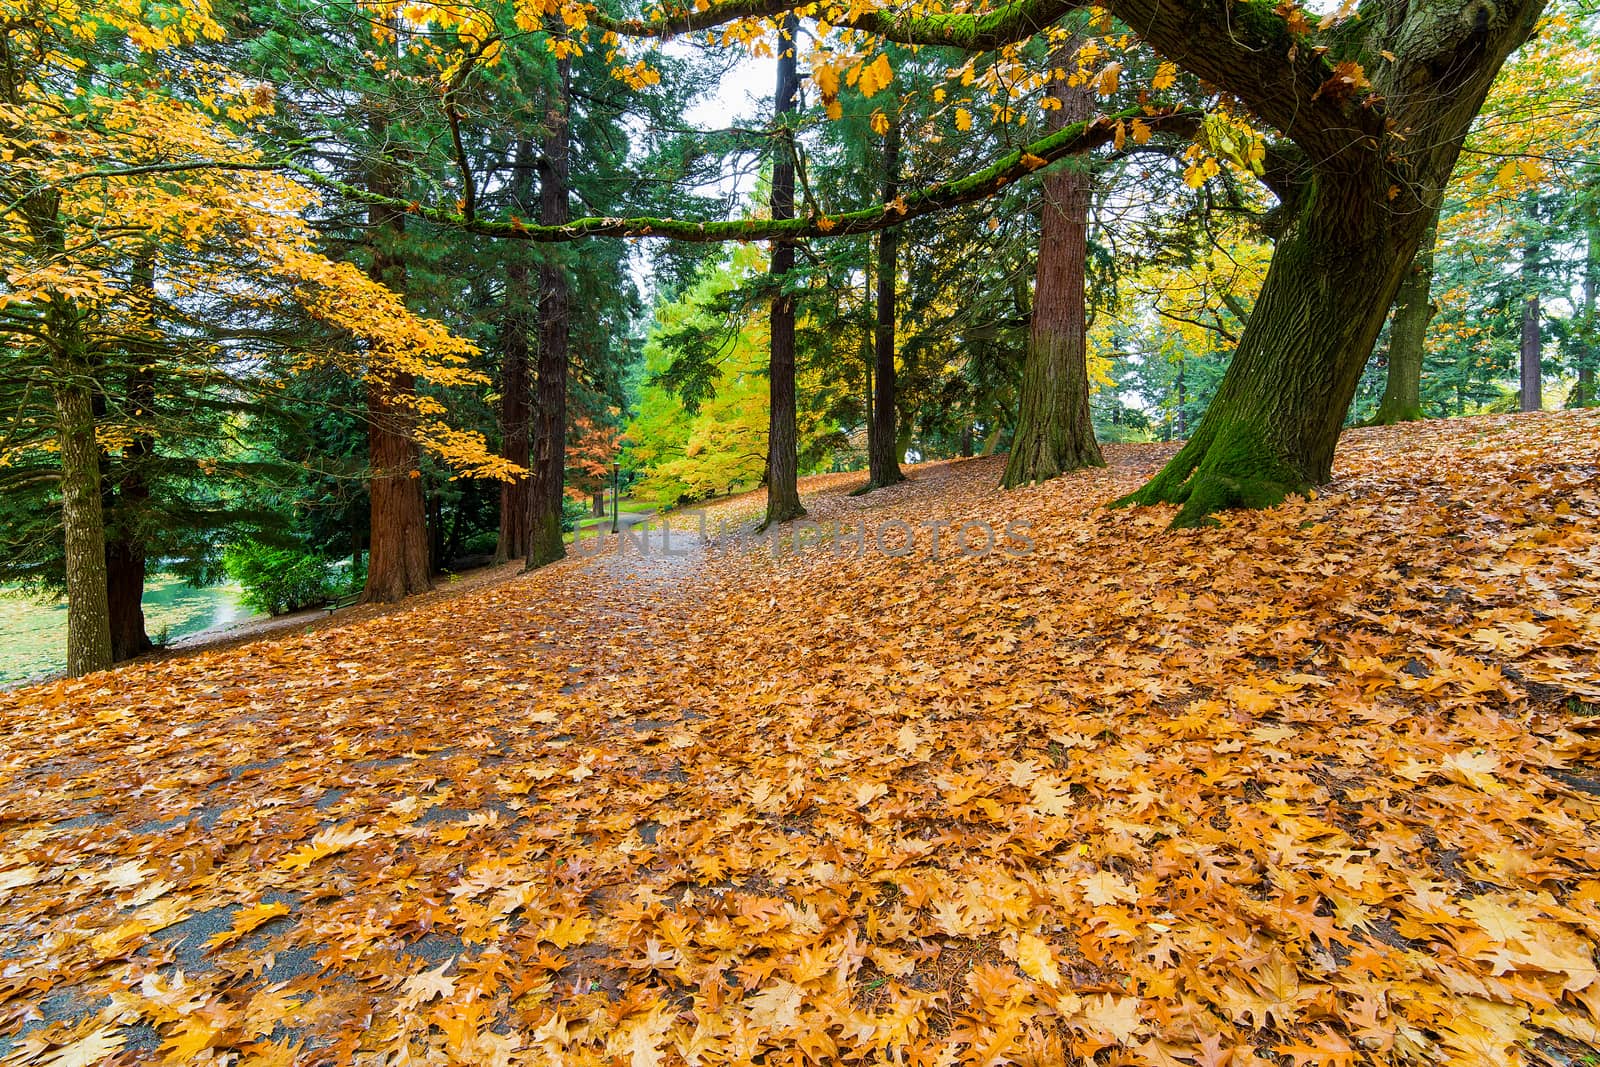 Garden Path Covered in Autumn Leaves by jpldesigns